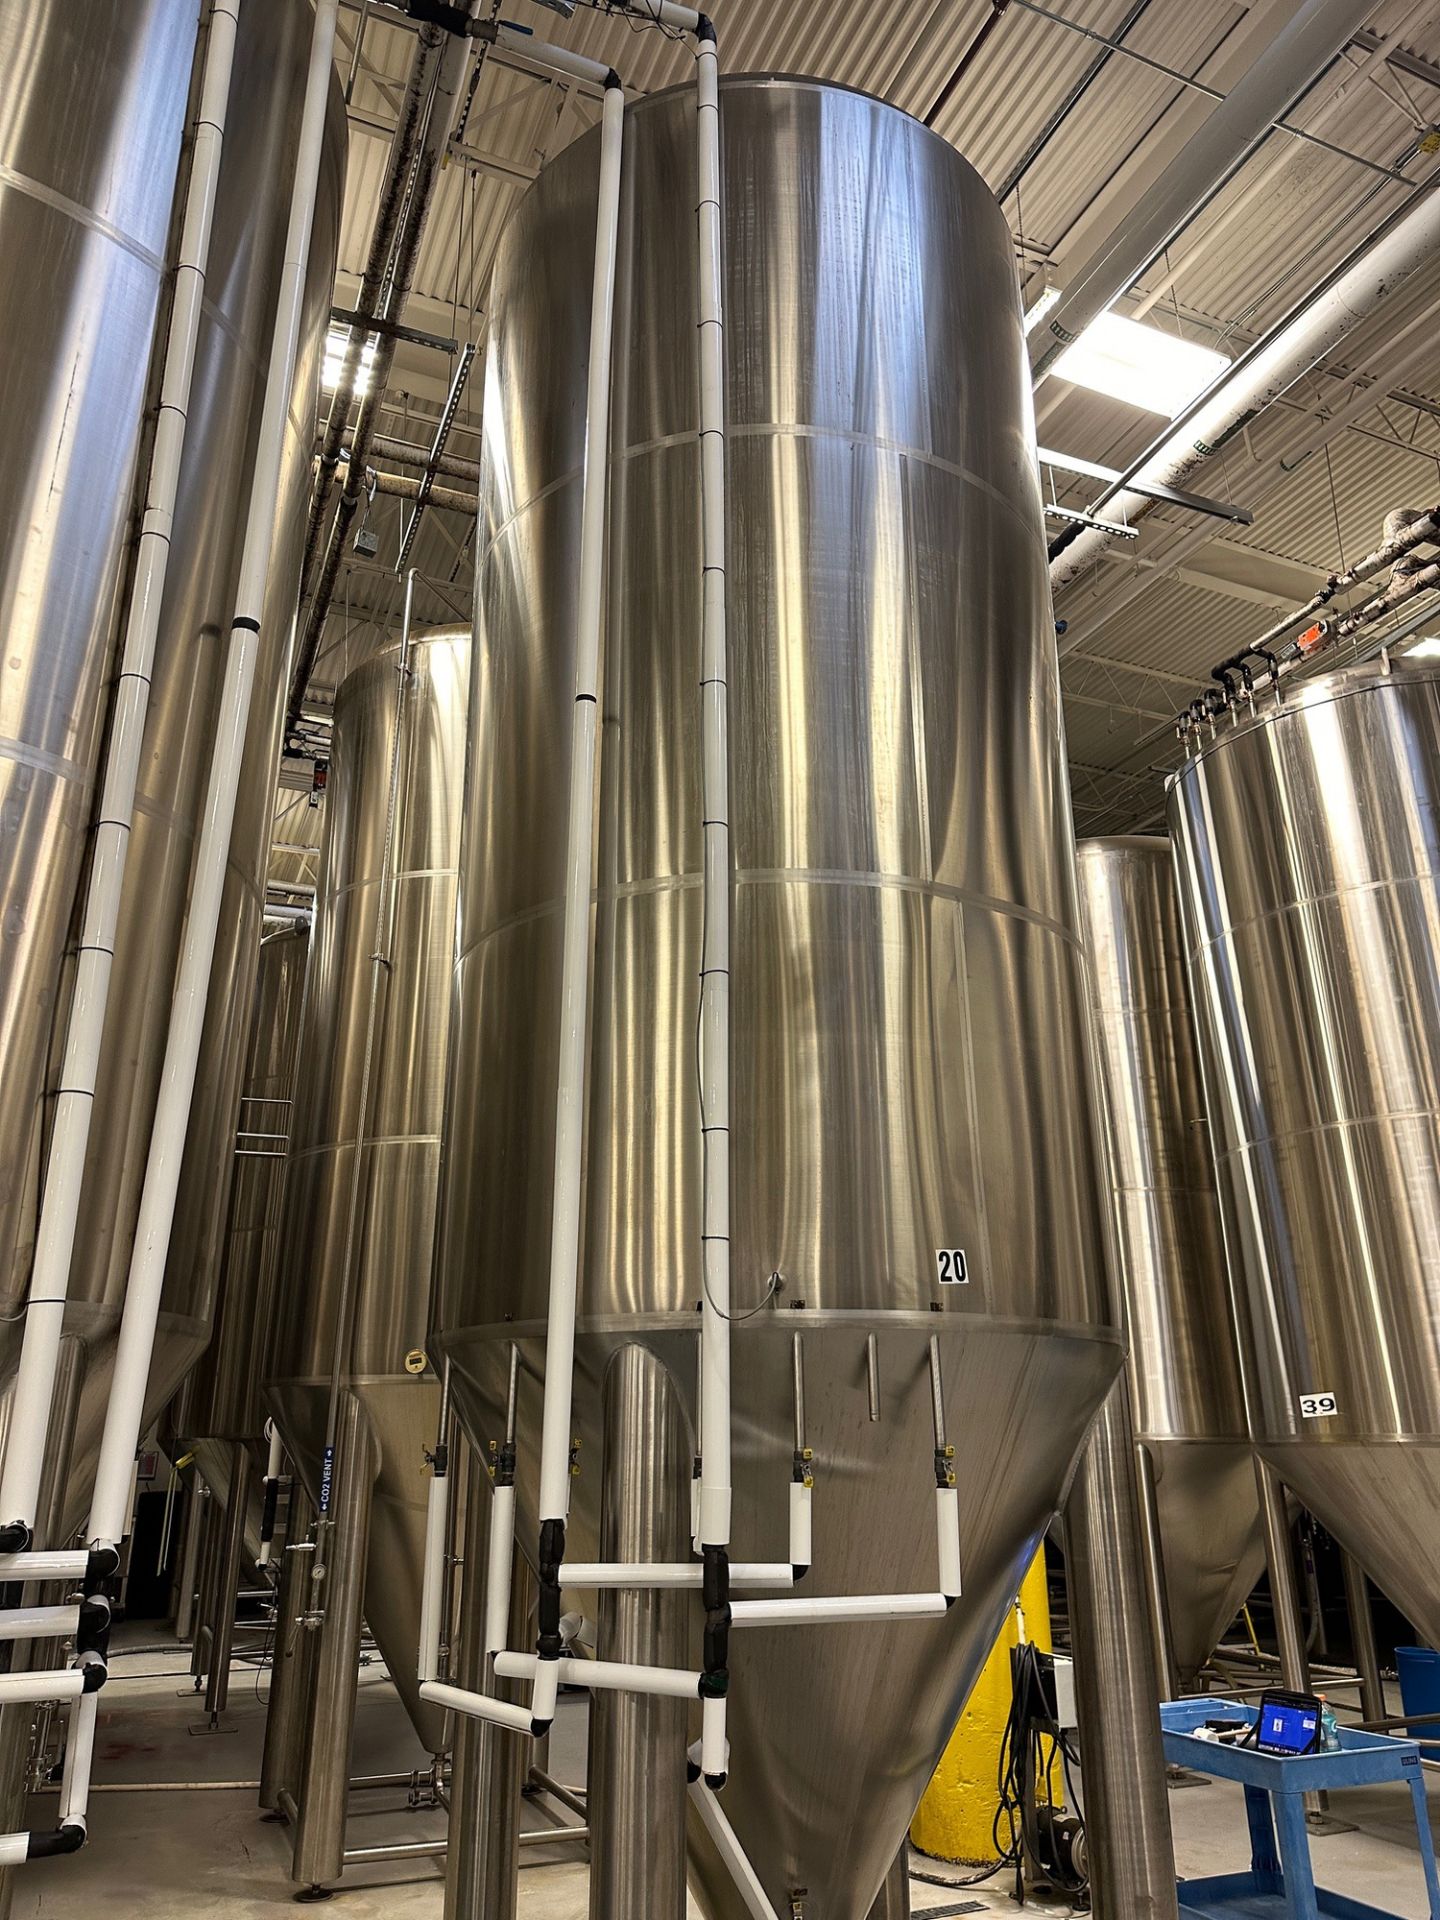 (1 of 2) 2018 Prospero 120 BBL FV / 148.6 BBL or 4,600 Gal Max Capaacity Jacketed Stainless Steel FV - Image 4 of 4